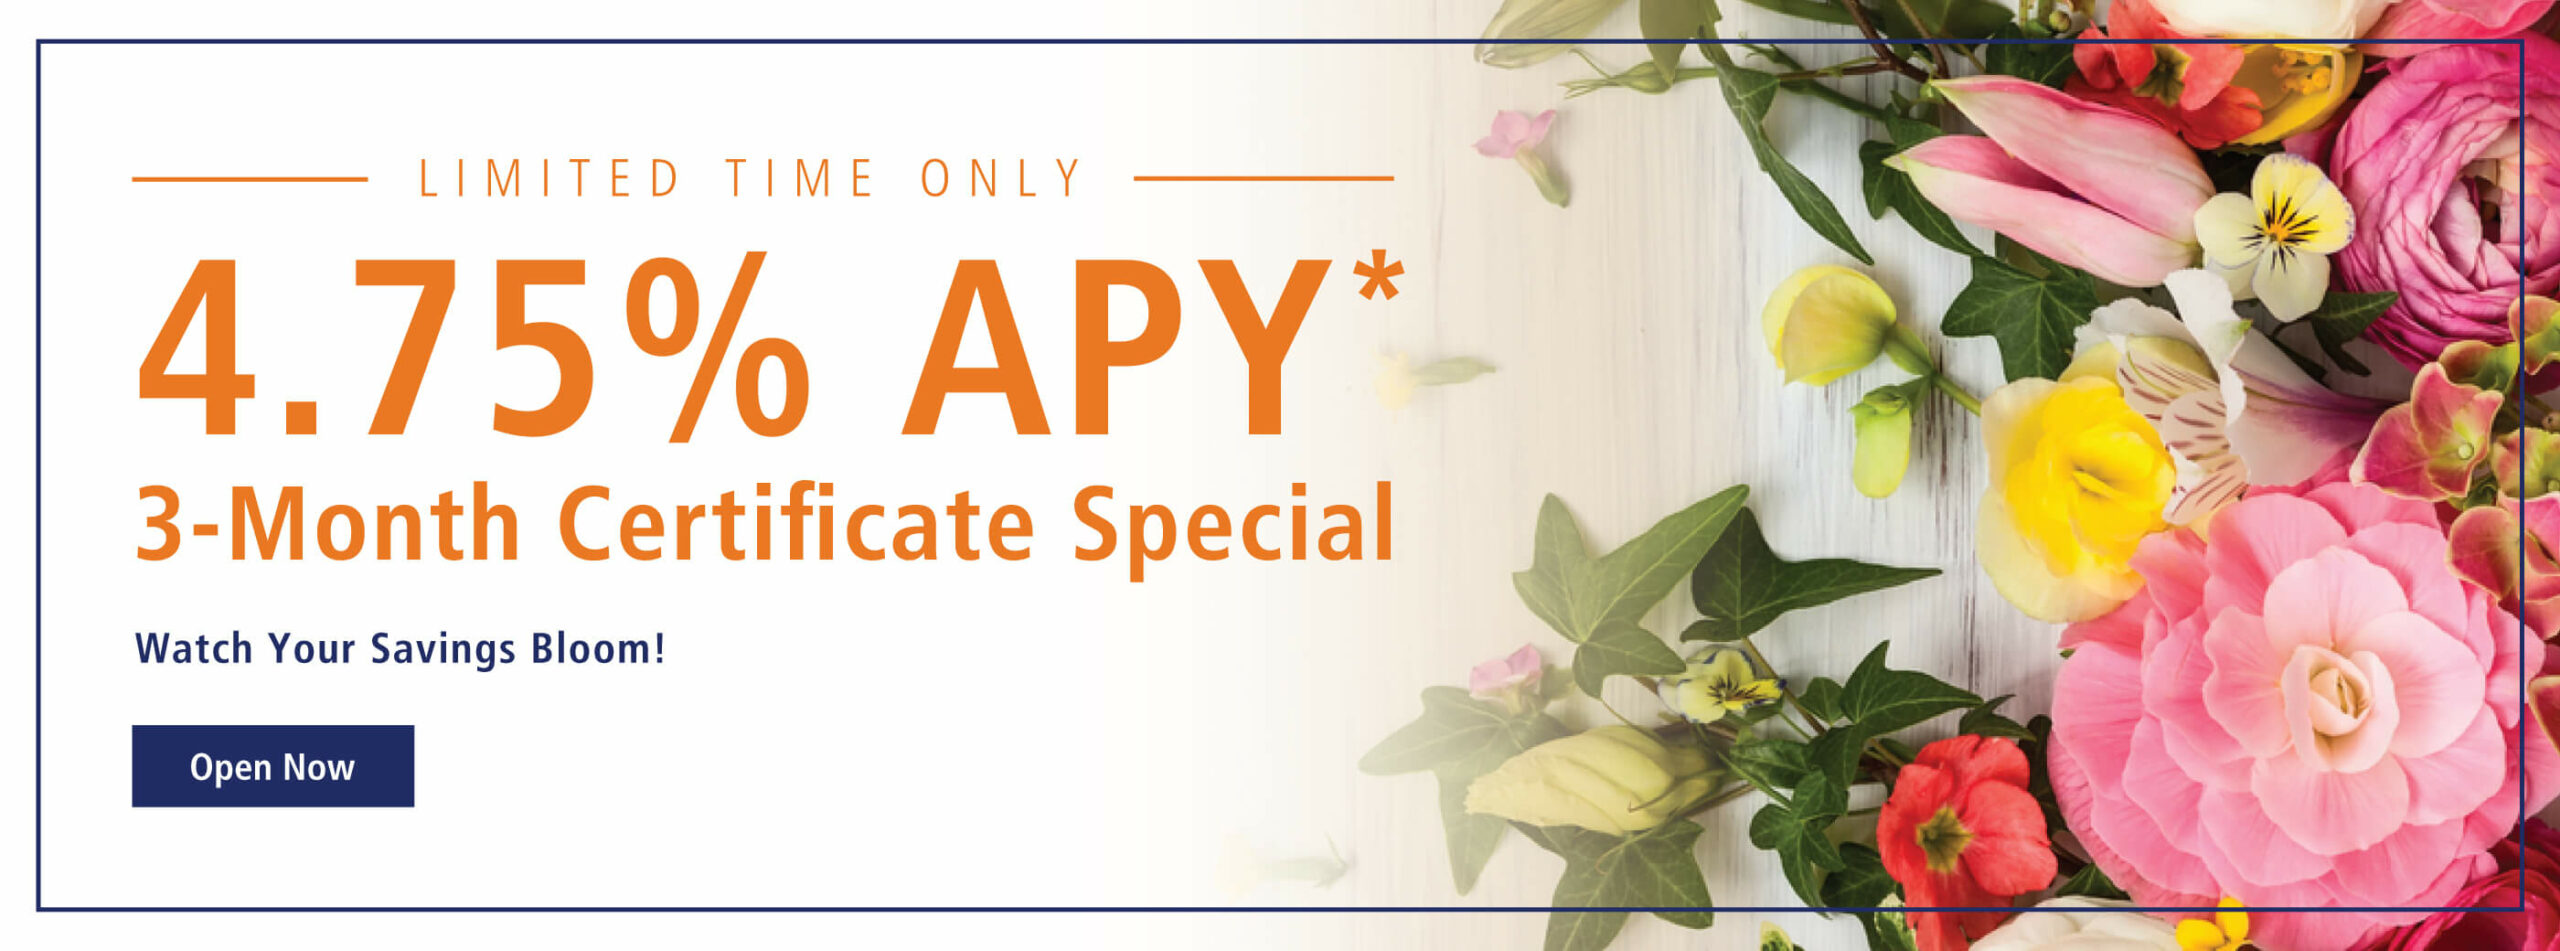 4.75% APY 3-Month Certificate Special. Request now!